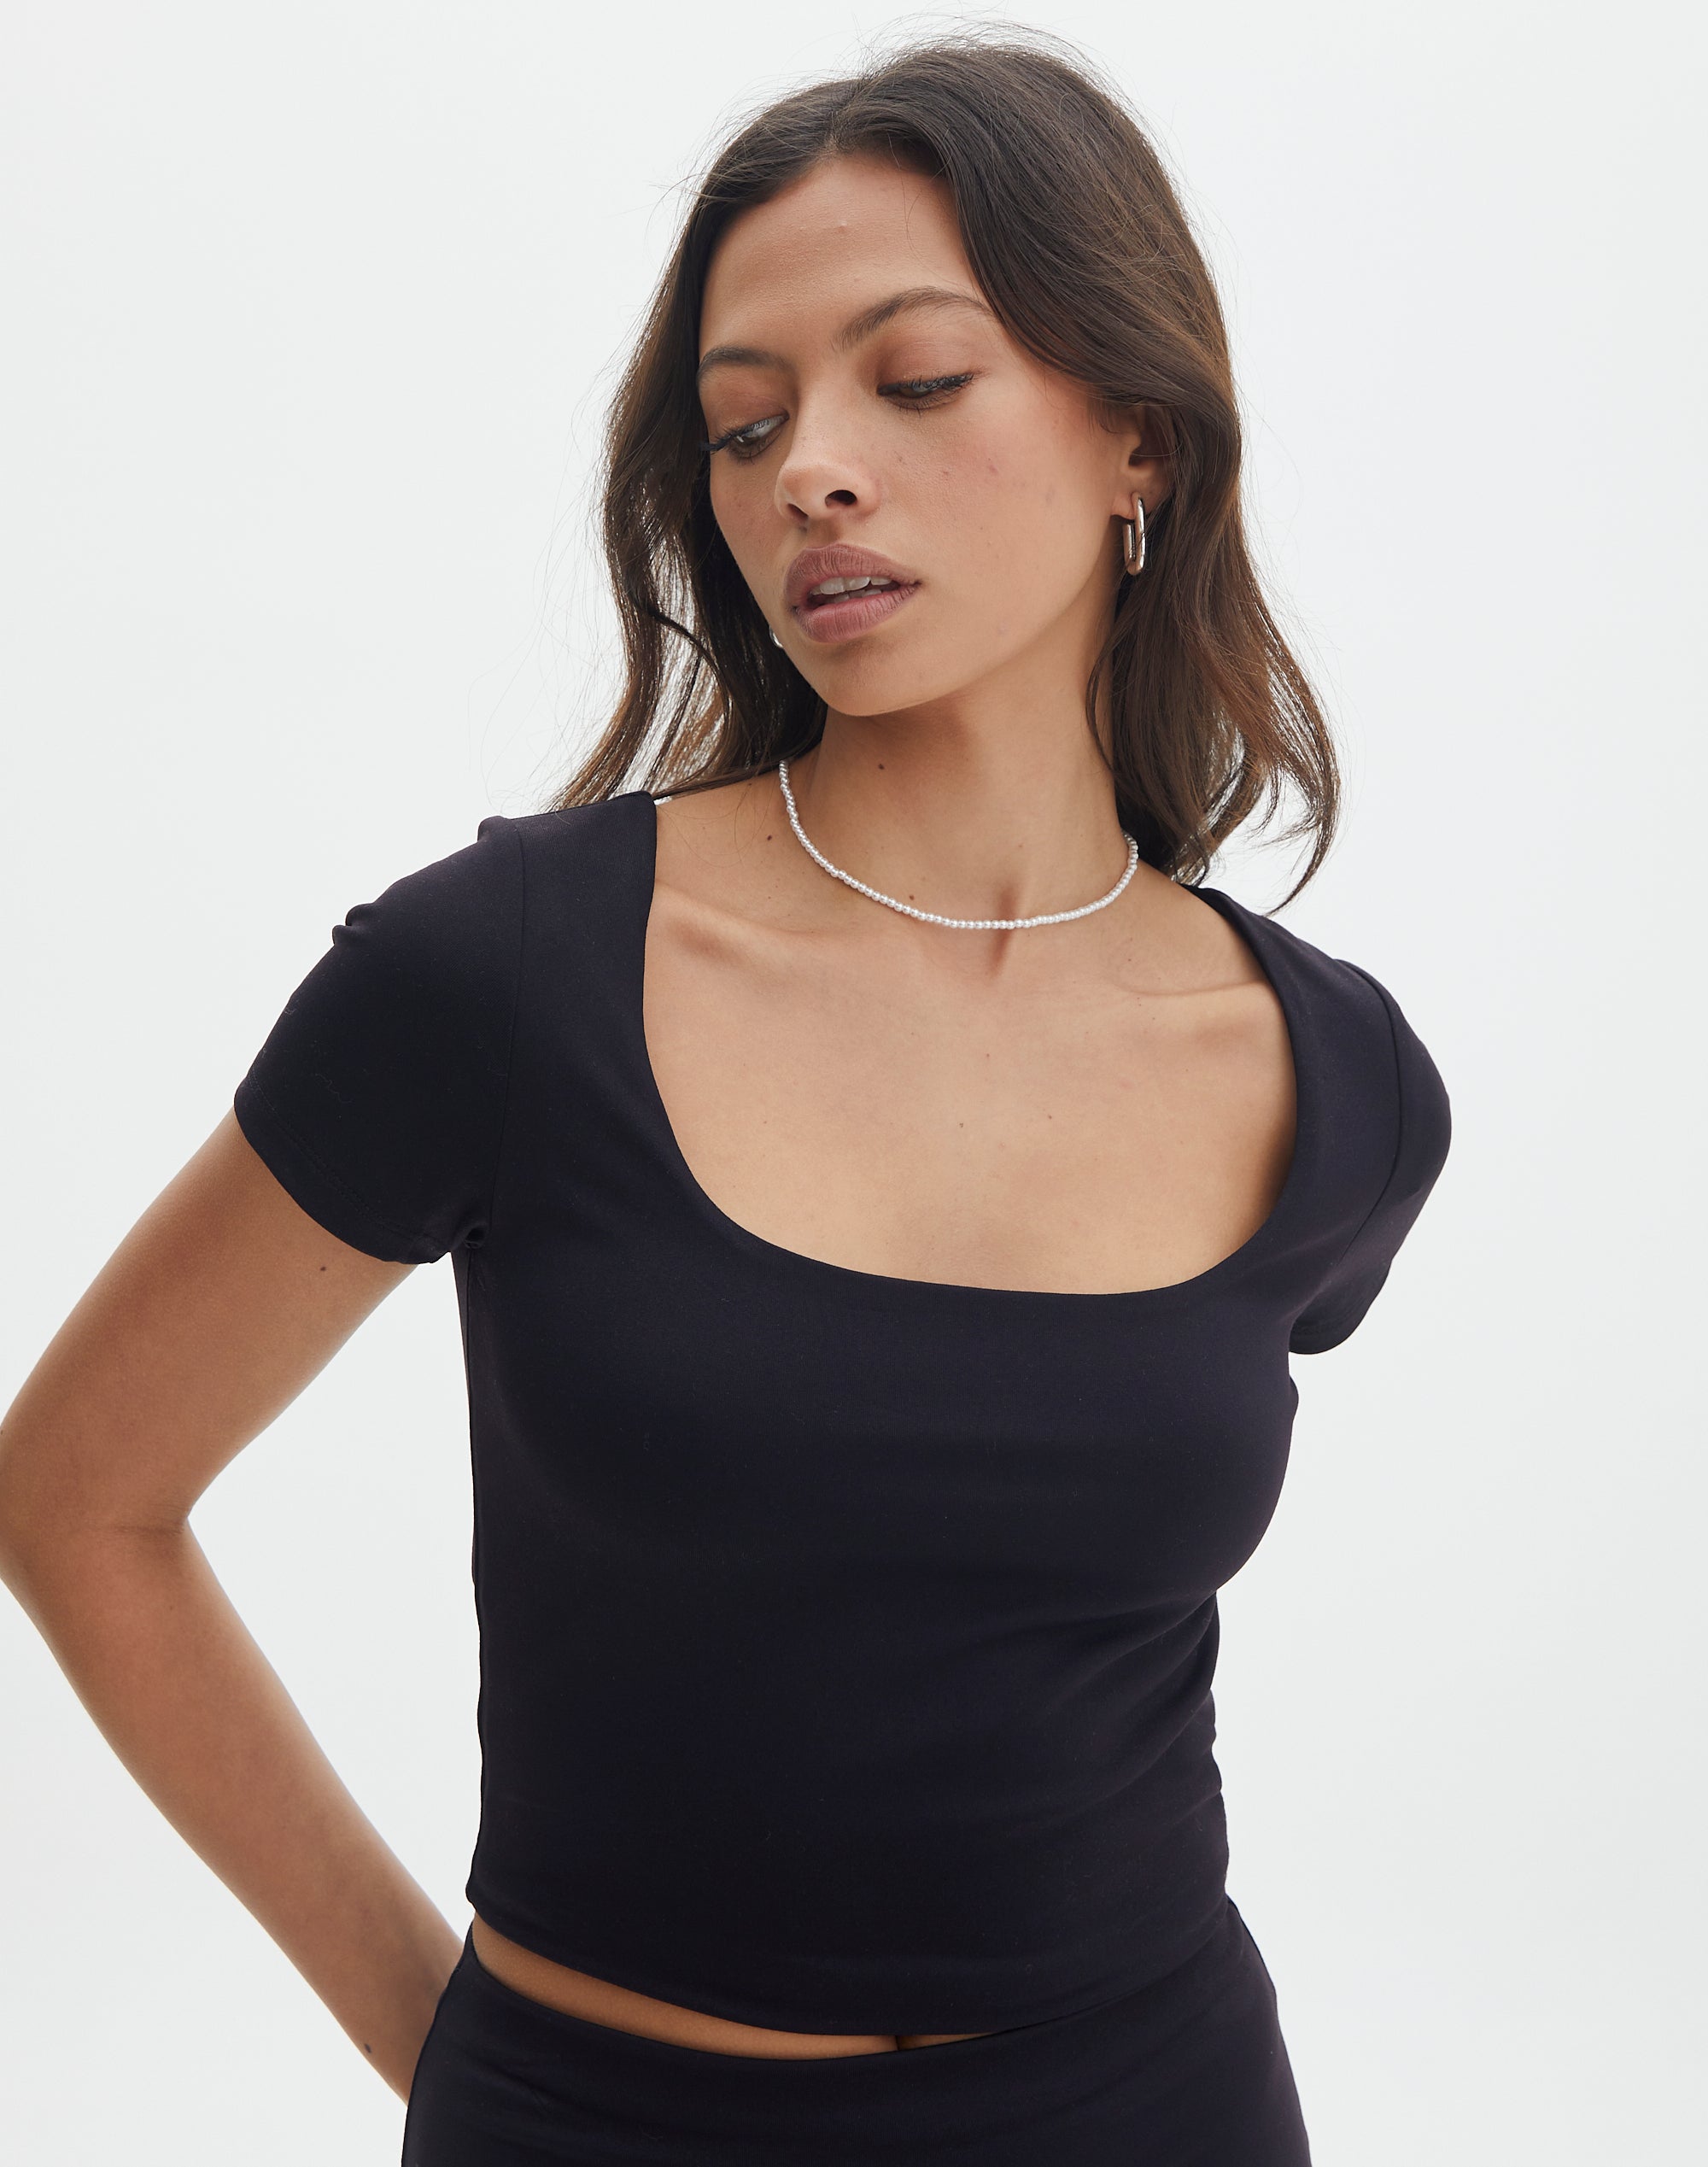 https://www.glassons.com/content/products/eden-crop-top-black-front-ts139135pch.jpg